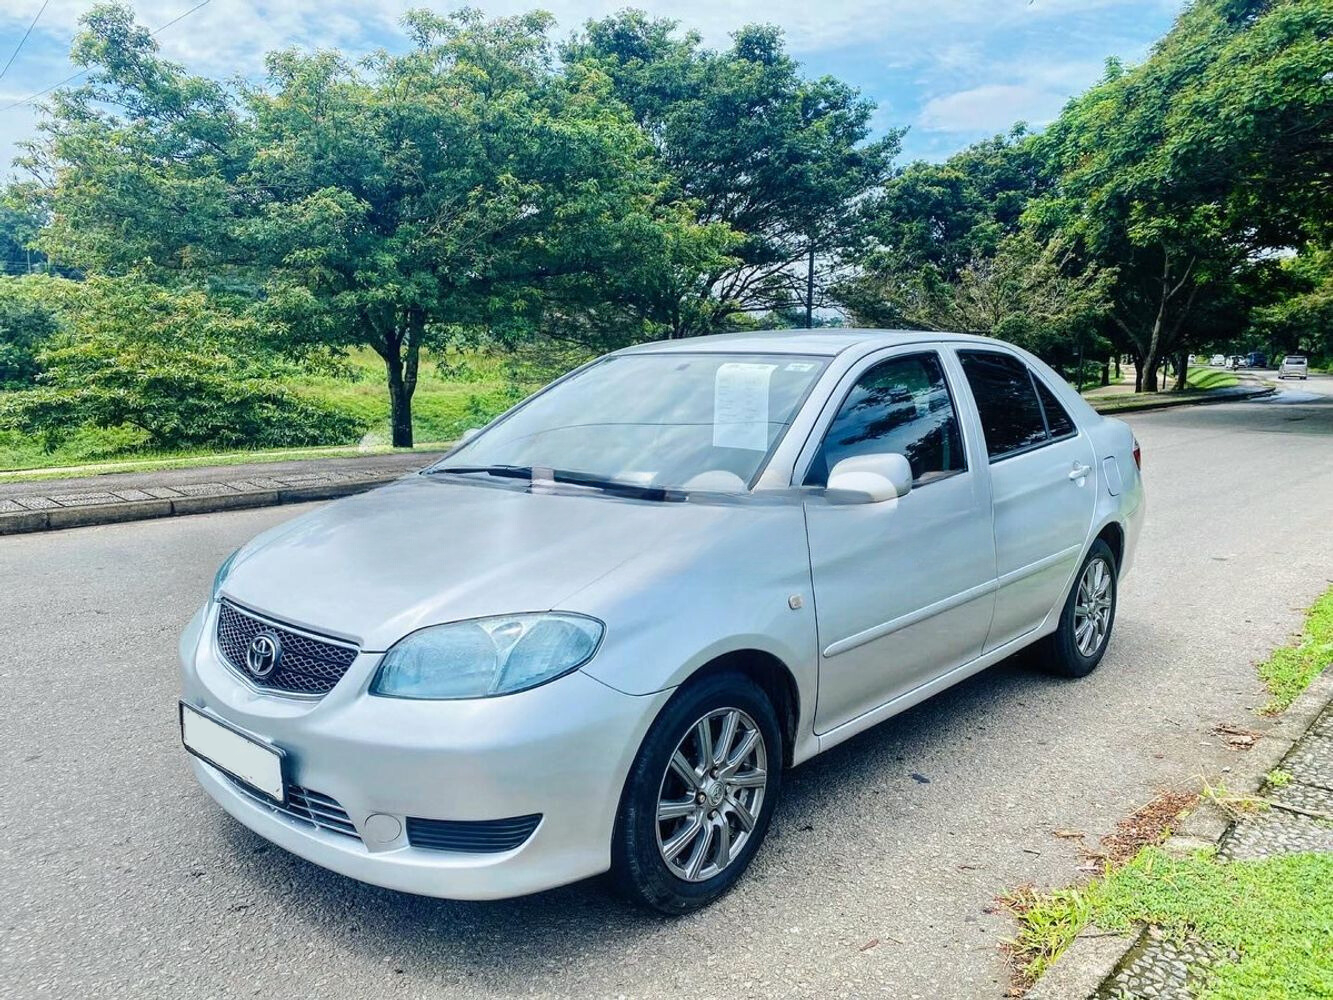 Toyota Vios 2003 Review